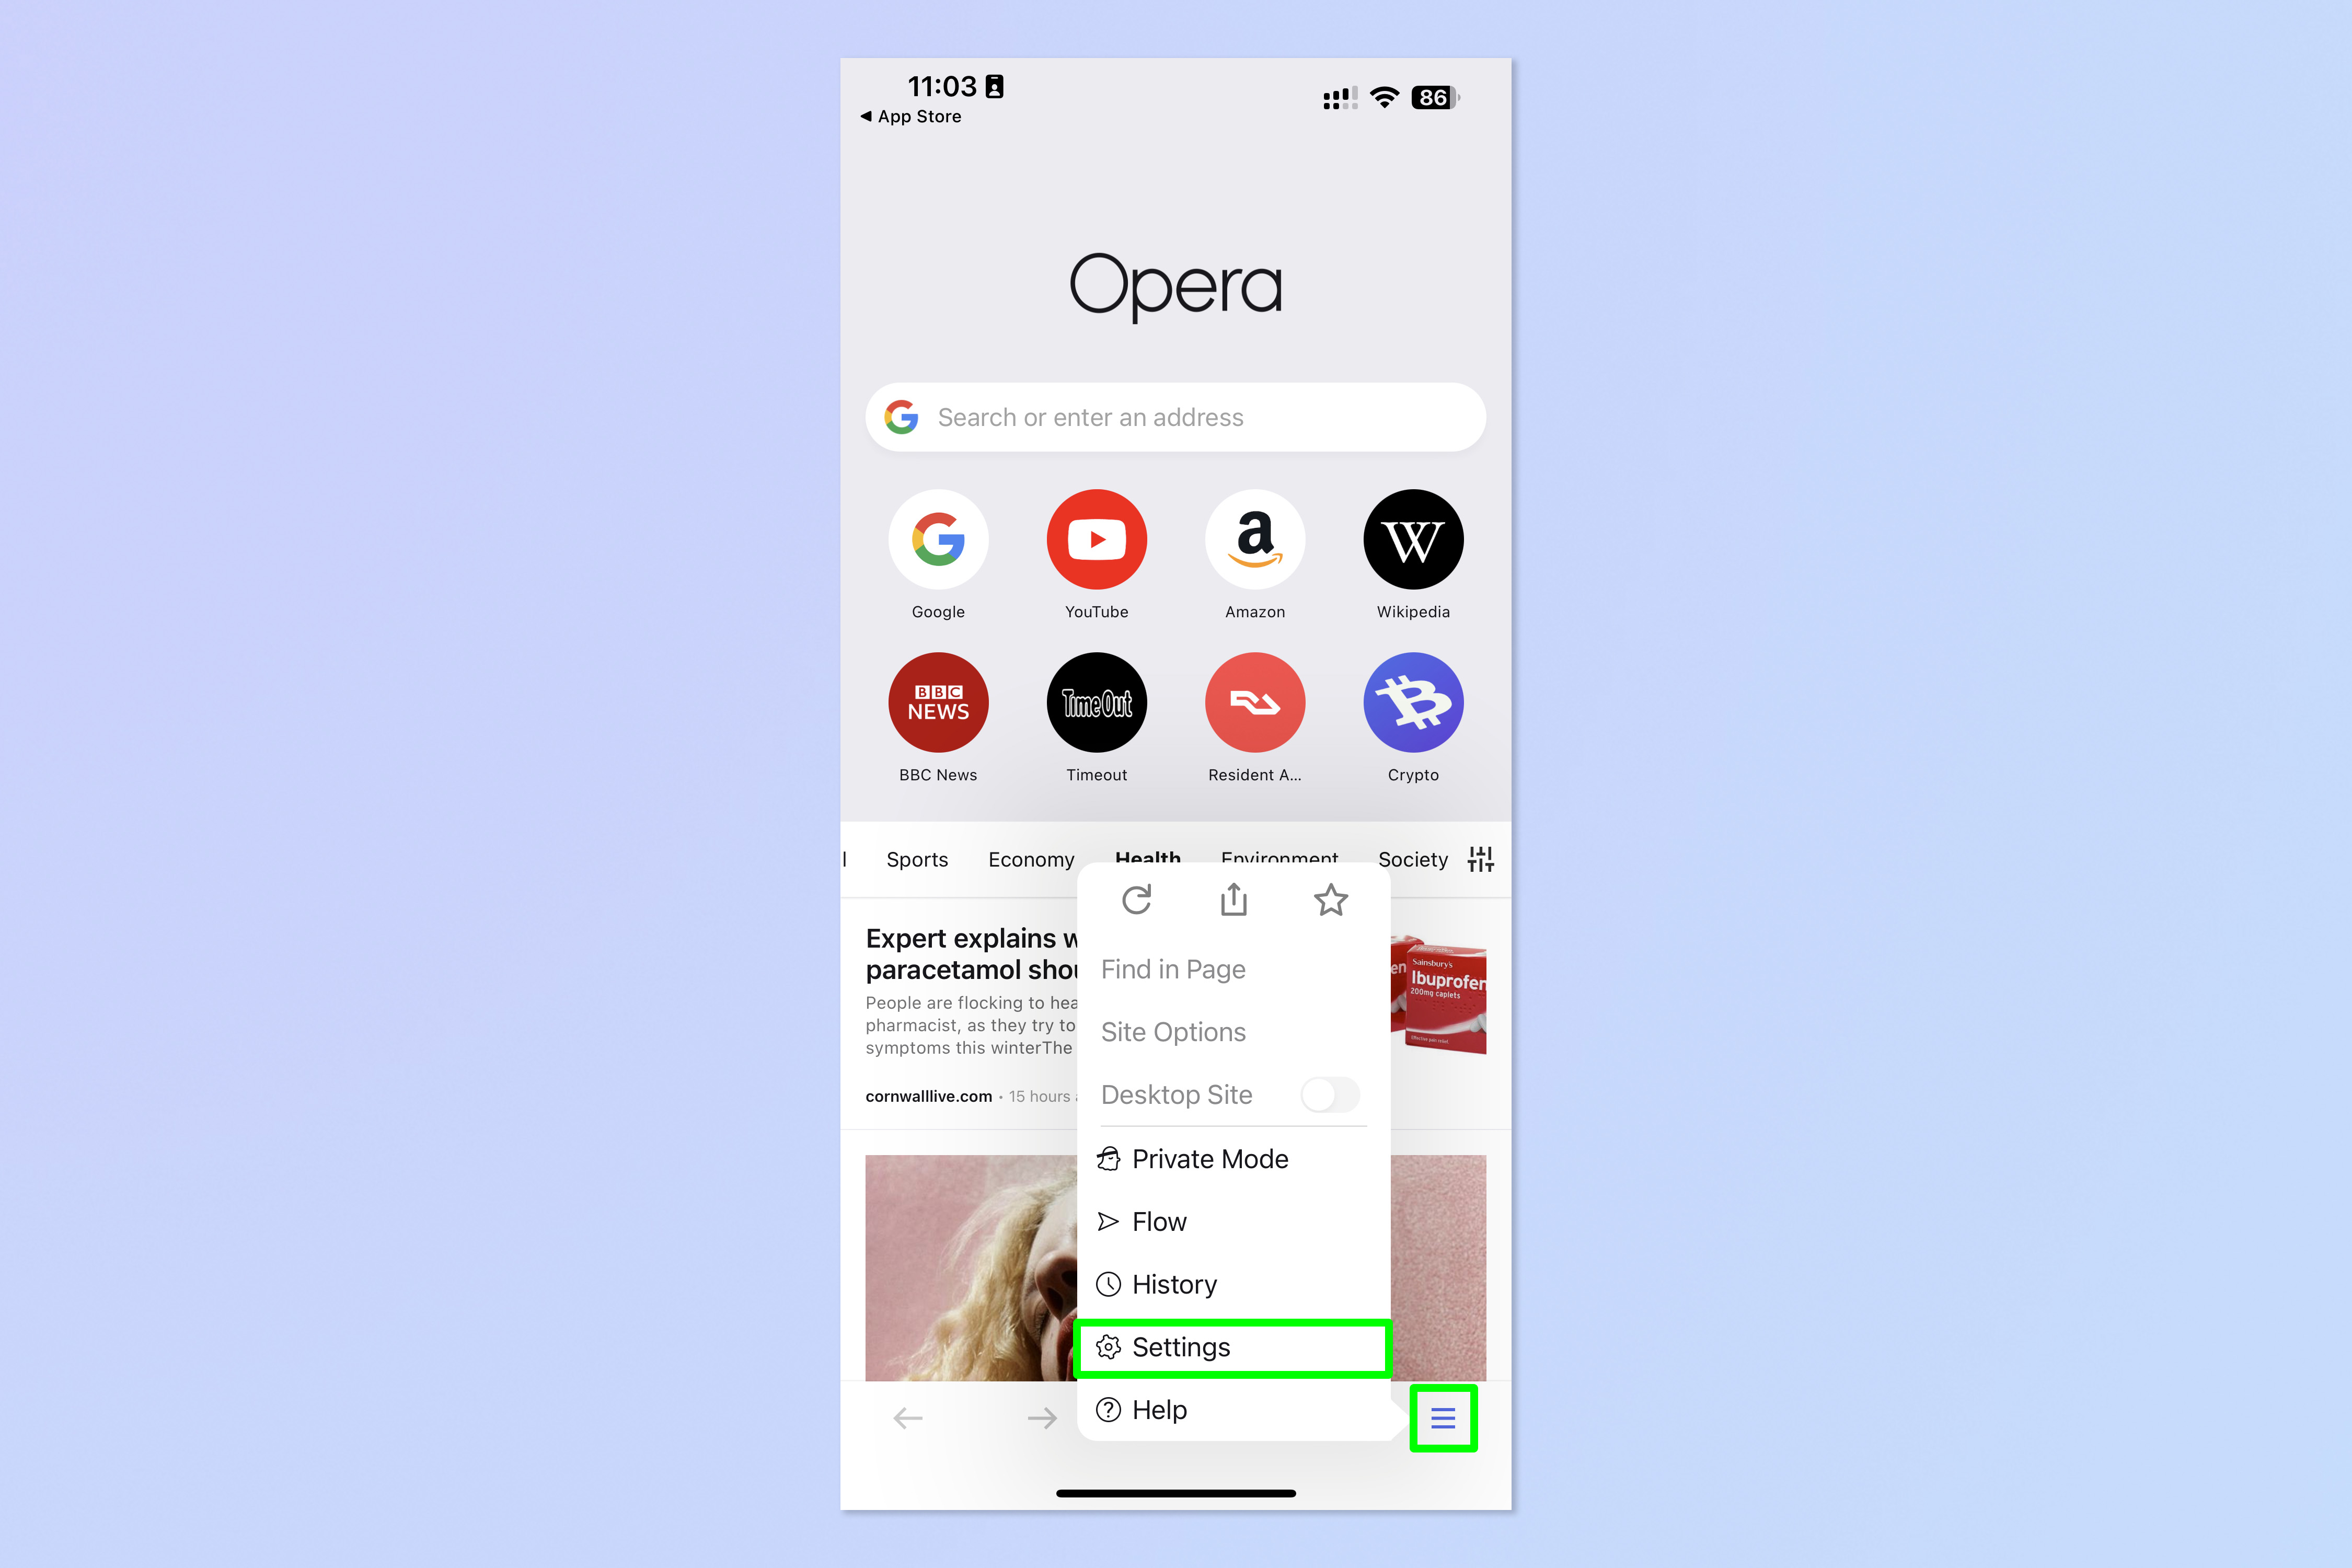 A screenshot showing the steps required to block ads on iPhone for free using Opera